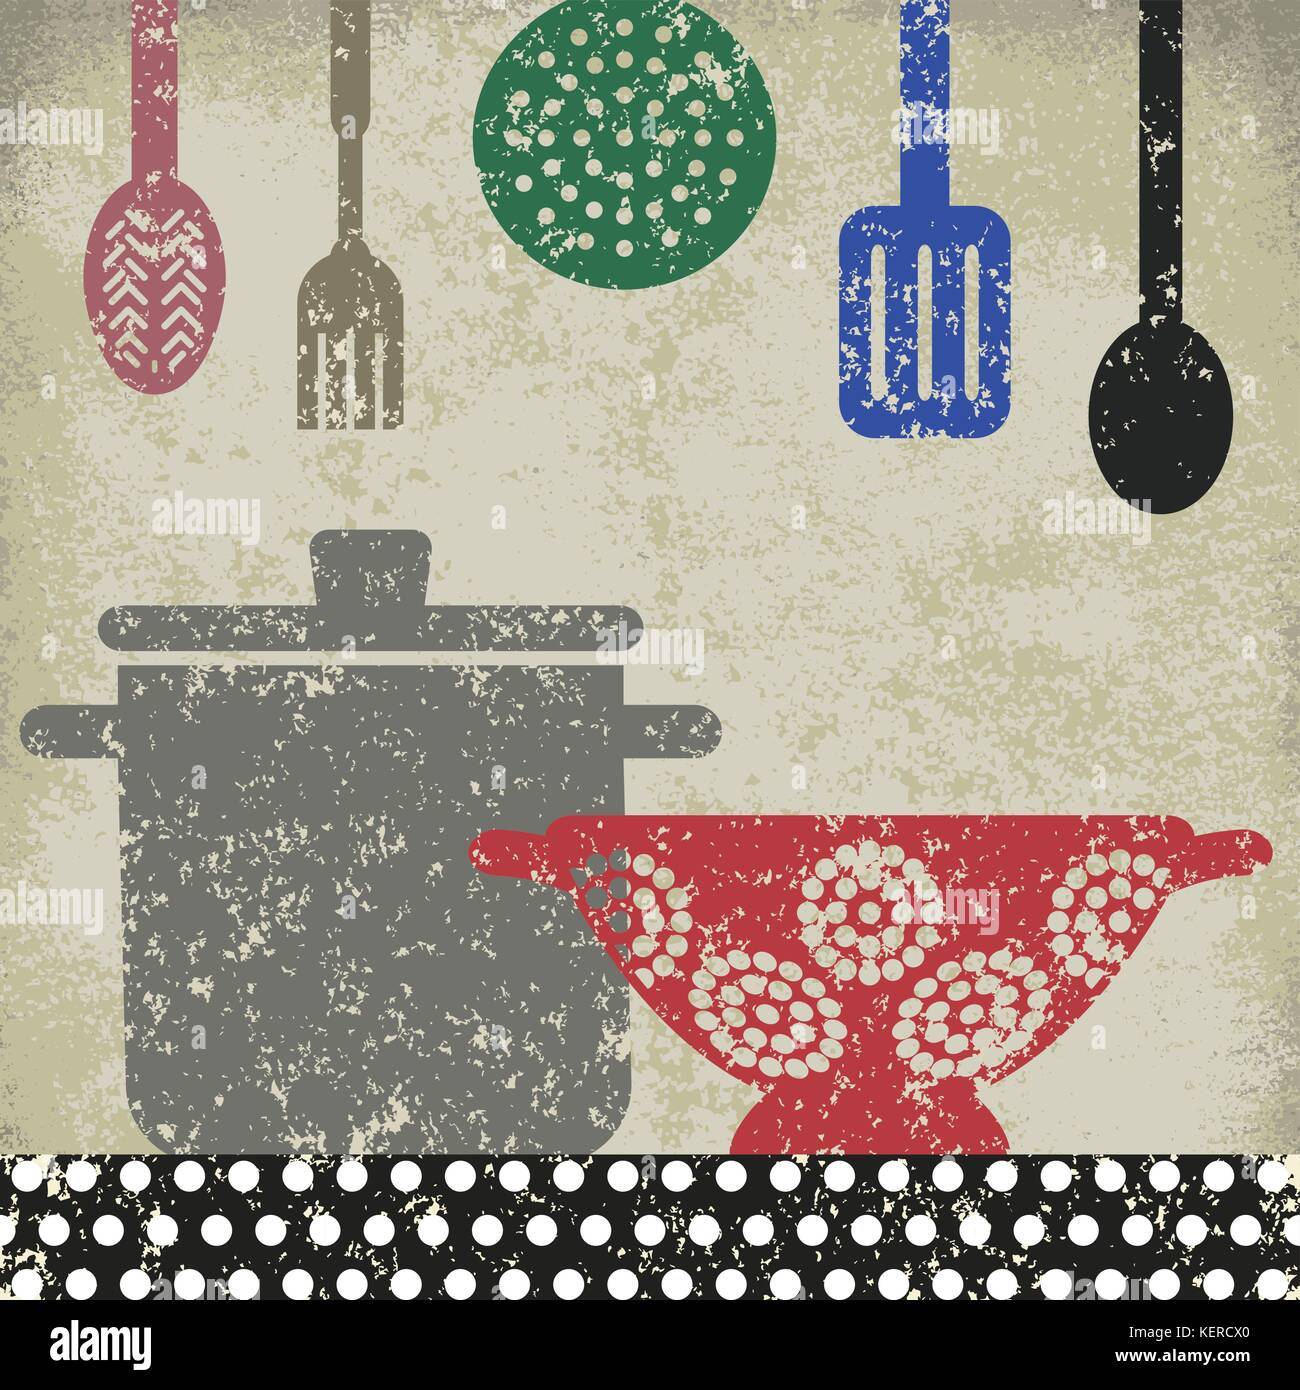 Vintage poster with cooking related objects. Stock Vector